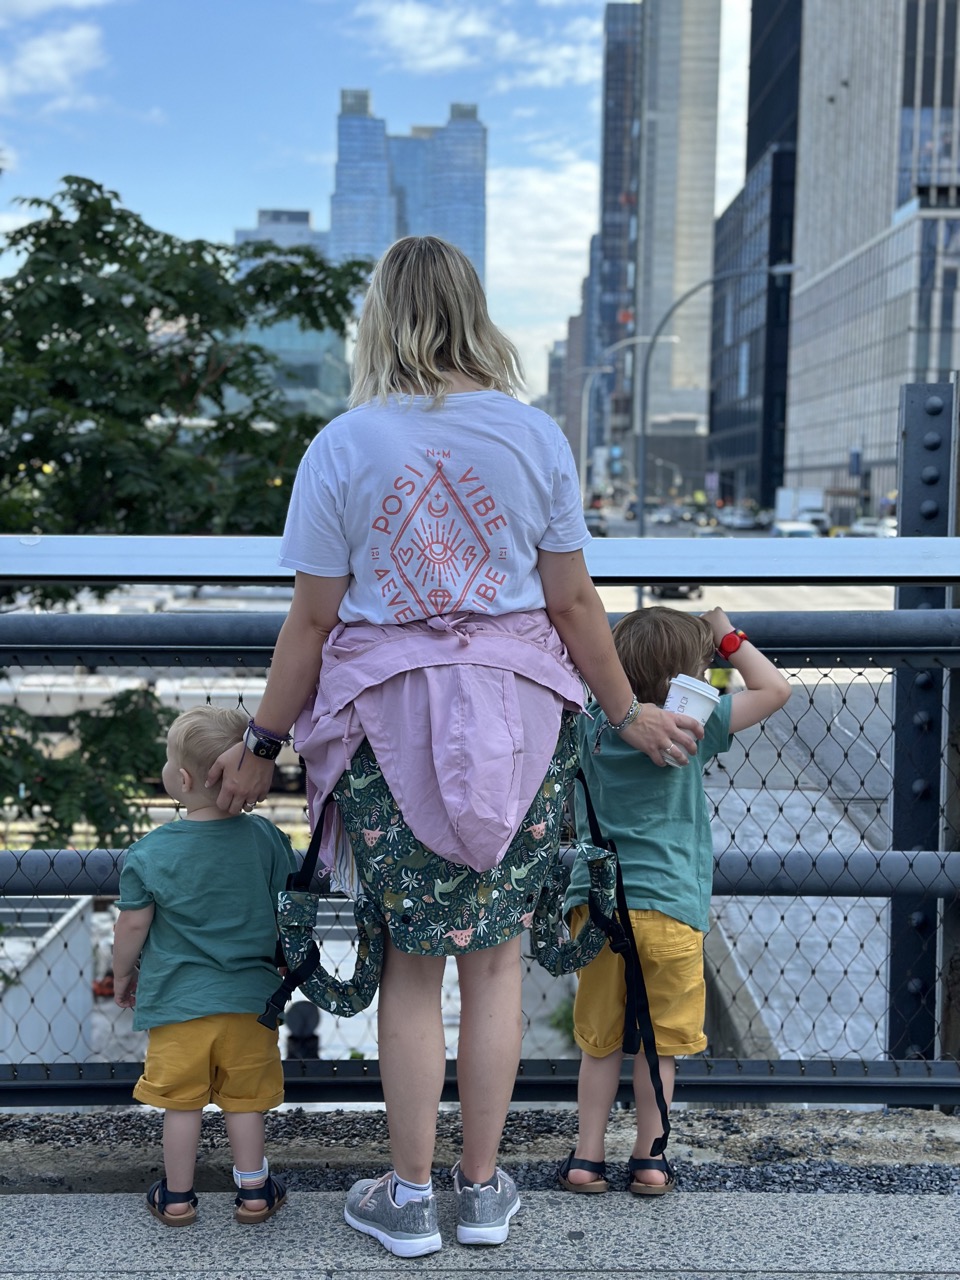 Mum and two kids - a toddler and preschooler both dressed in a green tshirt and yellow shorts, look out on New York